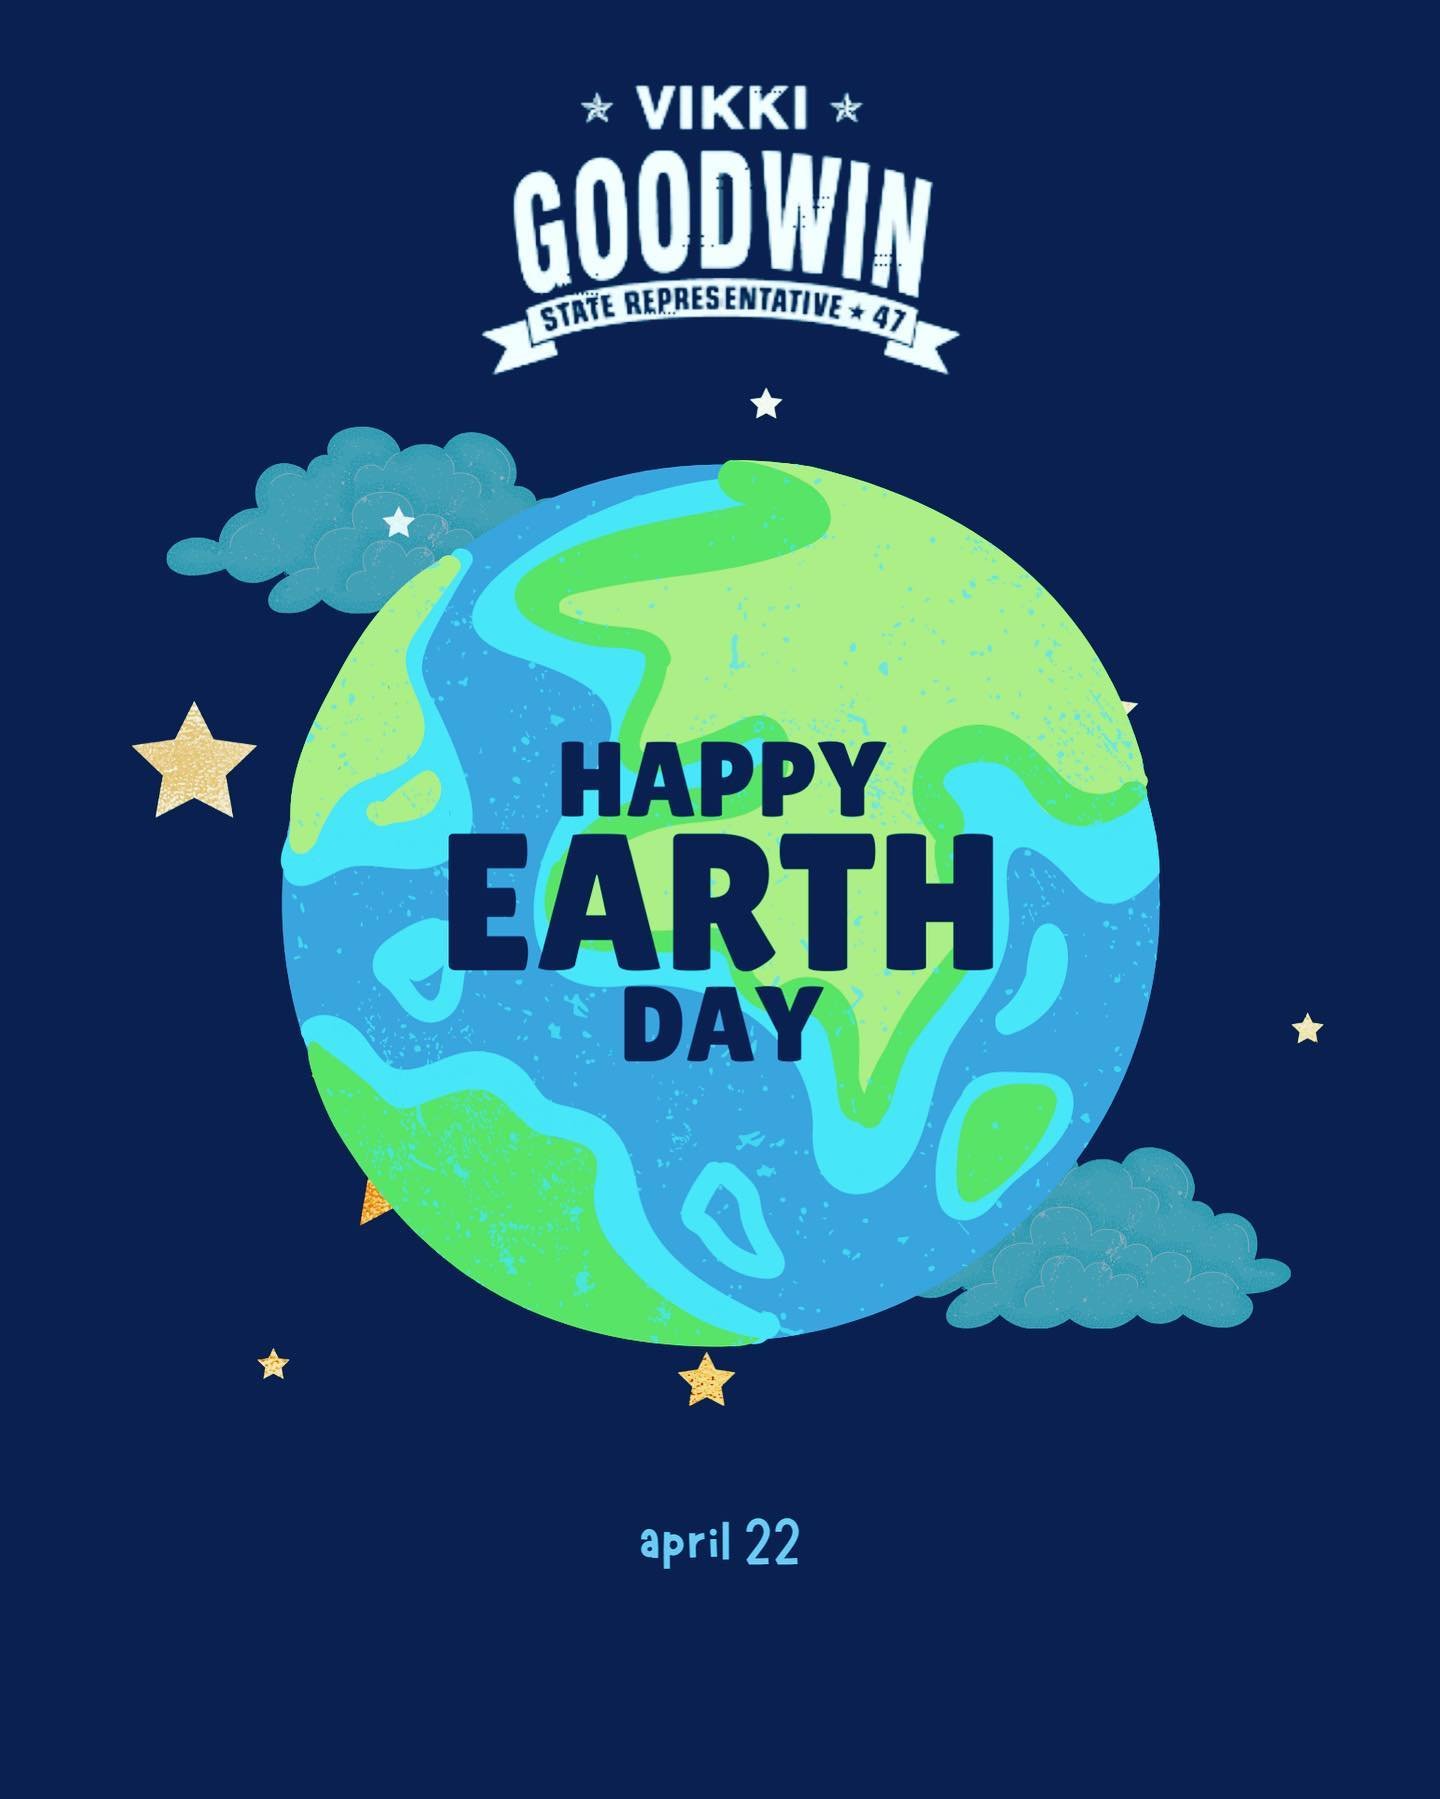 🌍 Last session, I introduced the Stewardship Amendment, which promises every Texan the right to a clean and healthy environment. As Earth Day reminds us of our duty to our planet, I'm preparing to refile this legislation in the next session. It's cr